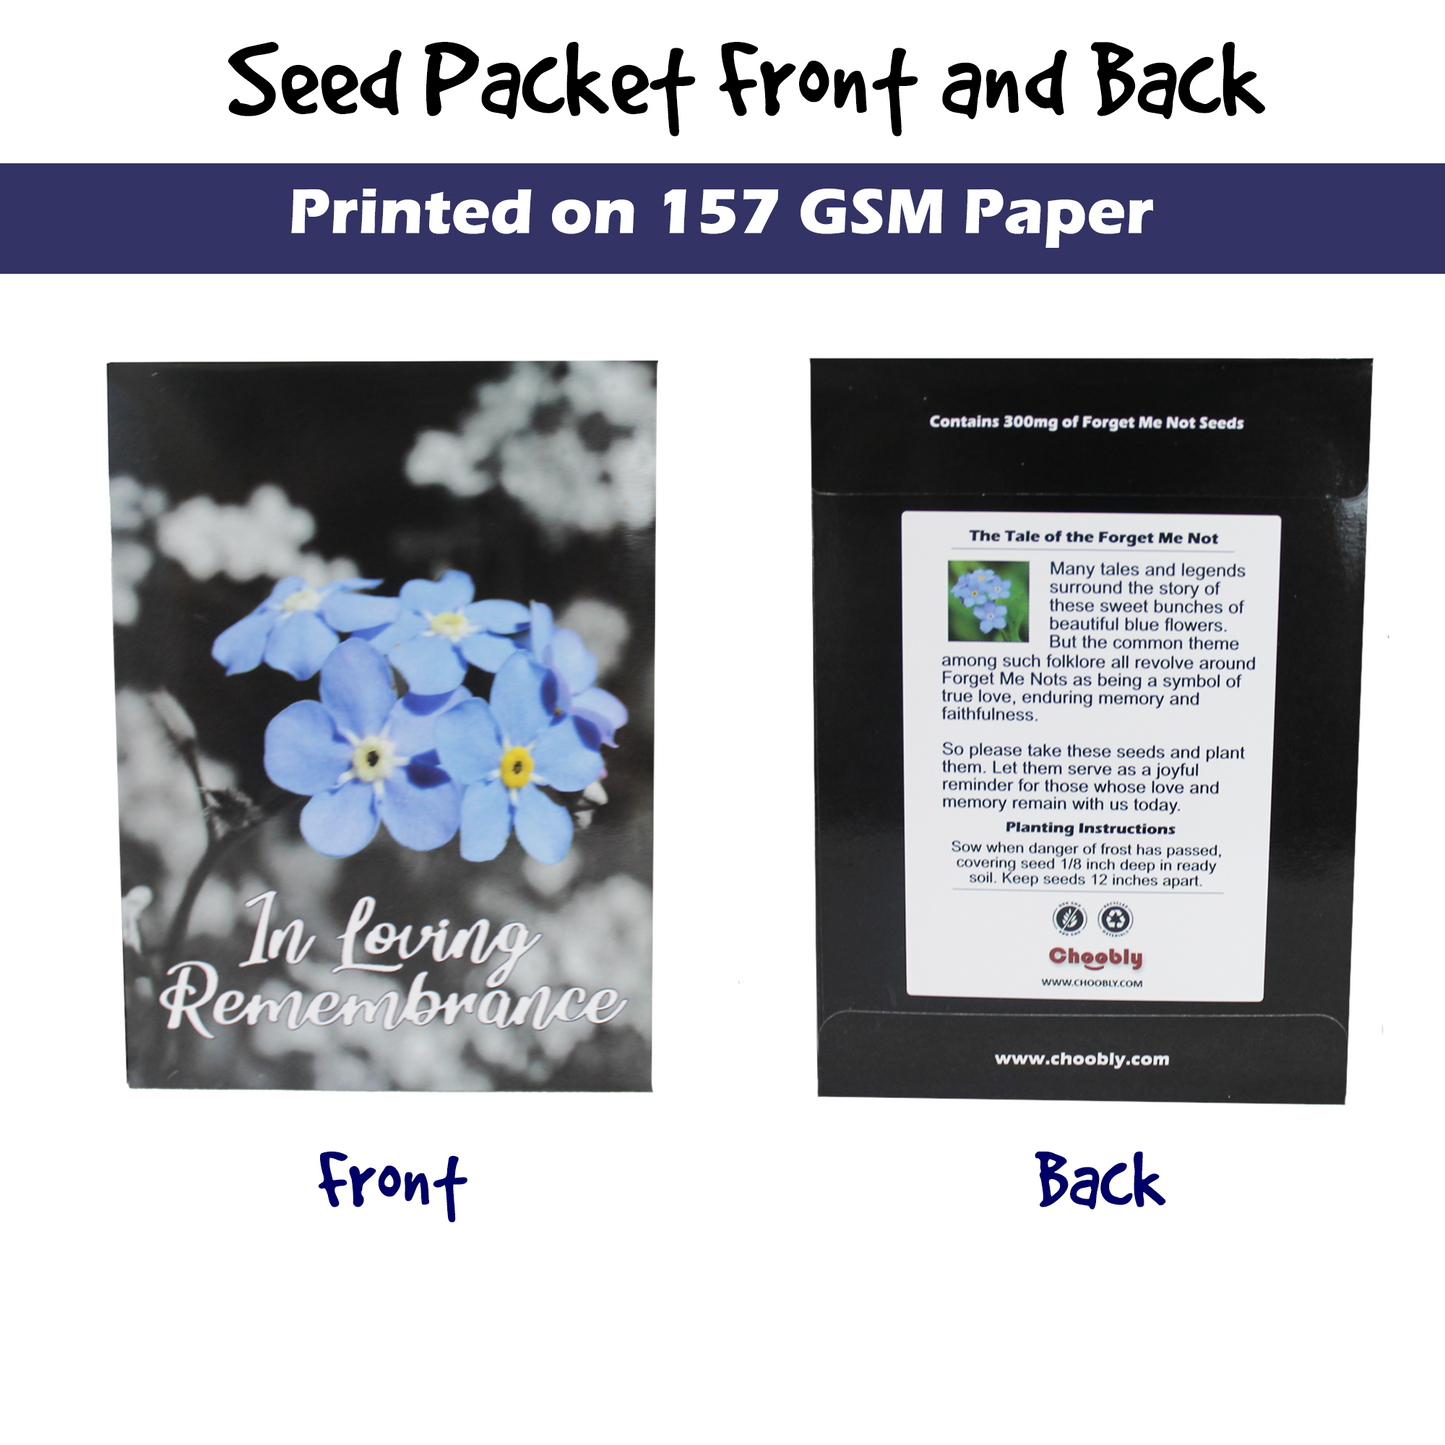 50pc Pre-Filled Seed Packet ''in Loving Remembrance'' Funeral Favors for Guests, Memorial Services, Celebration of Life, Forget Me Not Seed, Decorations, Sympathy, Memory, Flowers, Forgetmenot (50)…